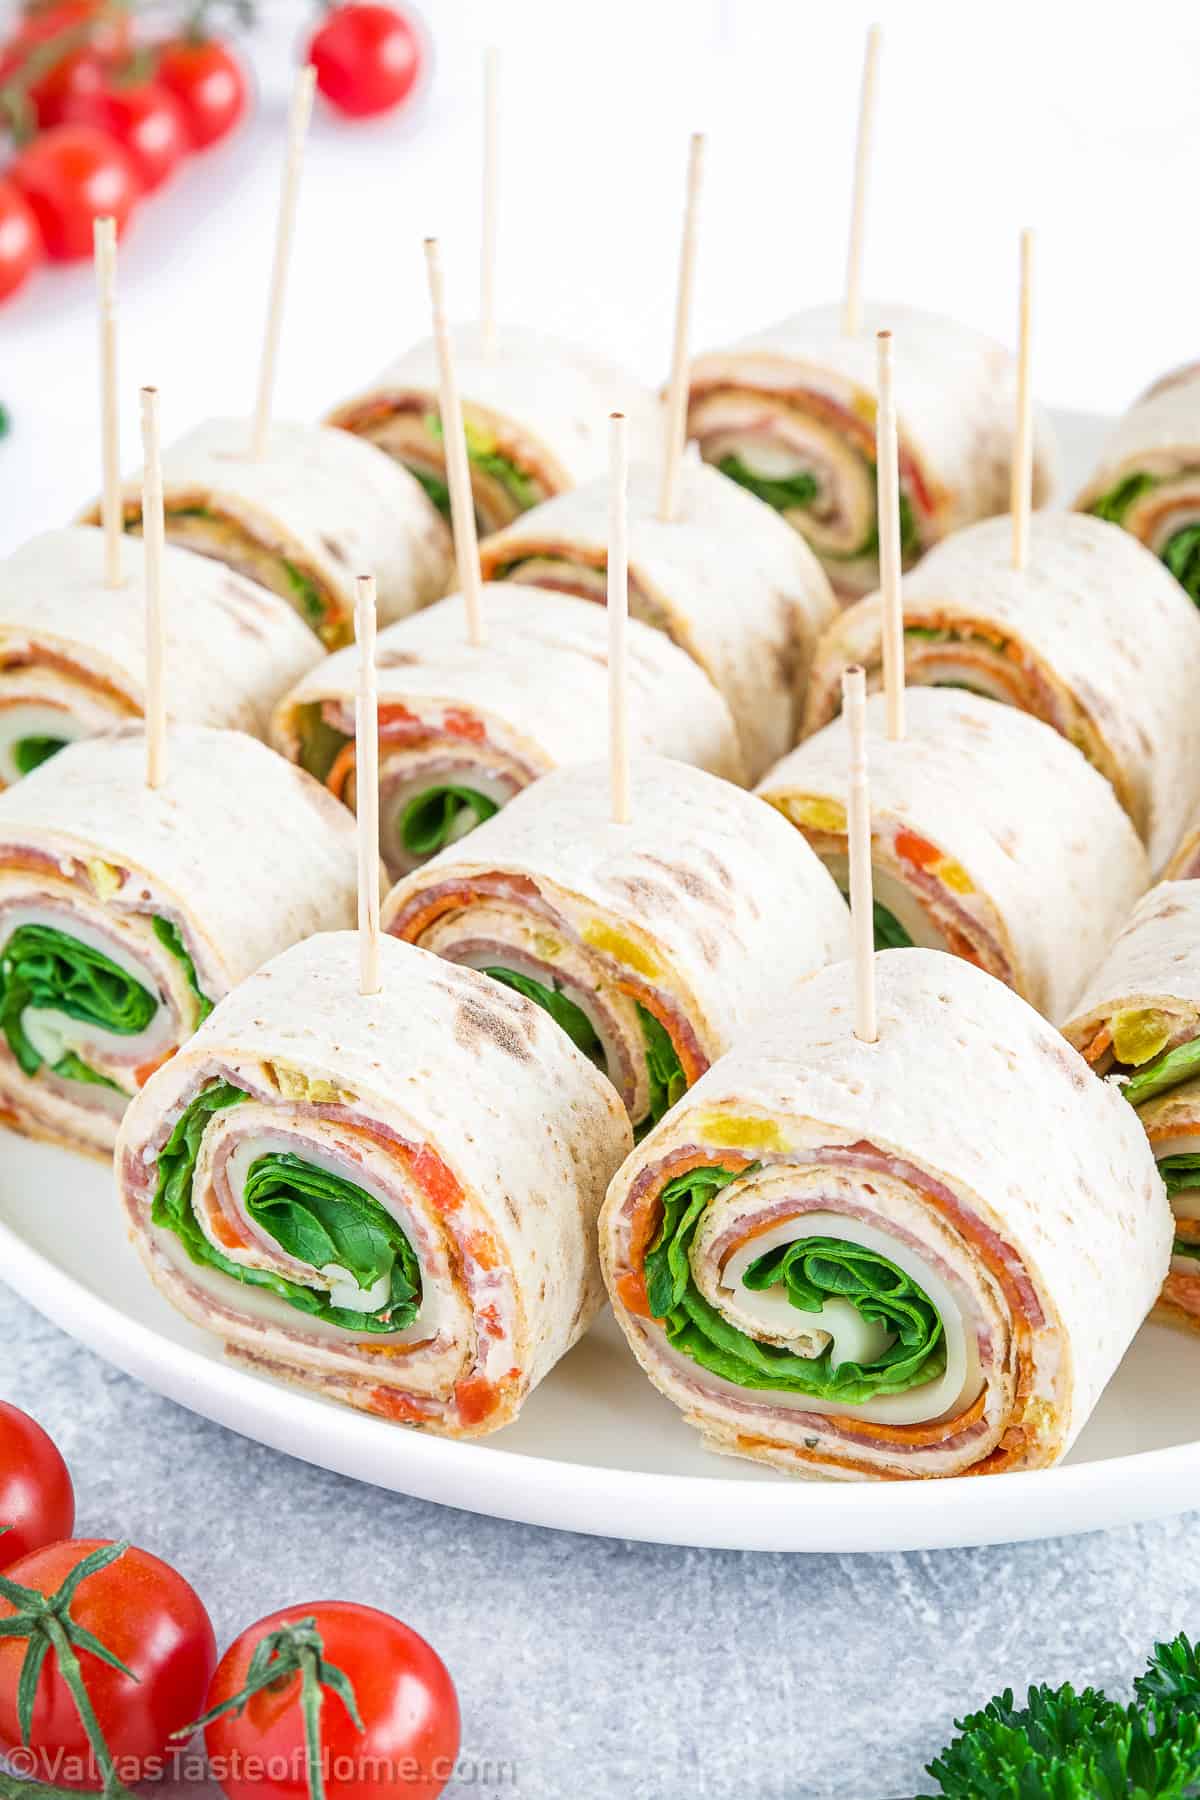 It features a delicious filling made with a combination of savory ingredients, such as salami and pepperoni, roasted red peppers, pasta sauce, cream cheese, and parmesan cheese for the tastiest pinwheels you’ve ever had!